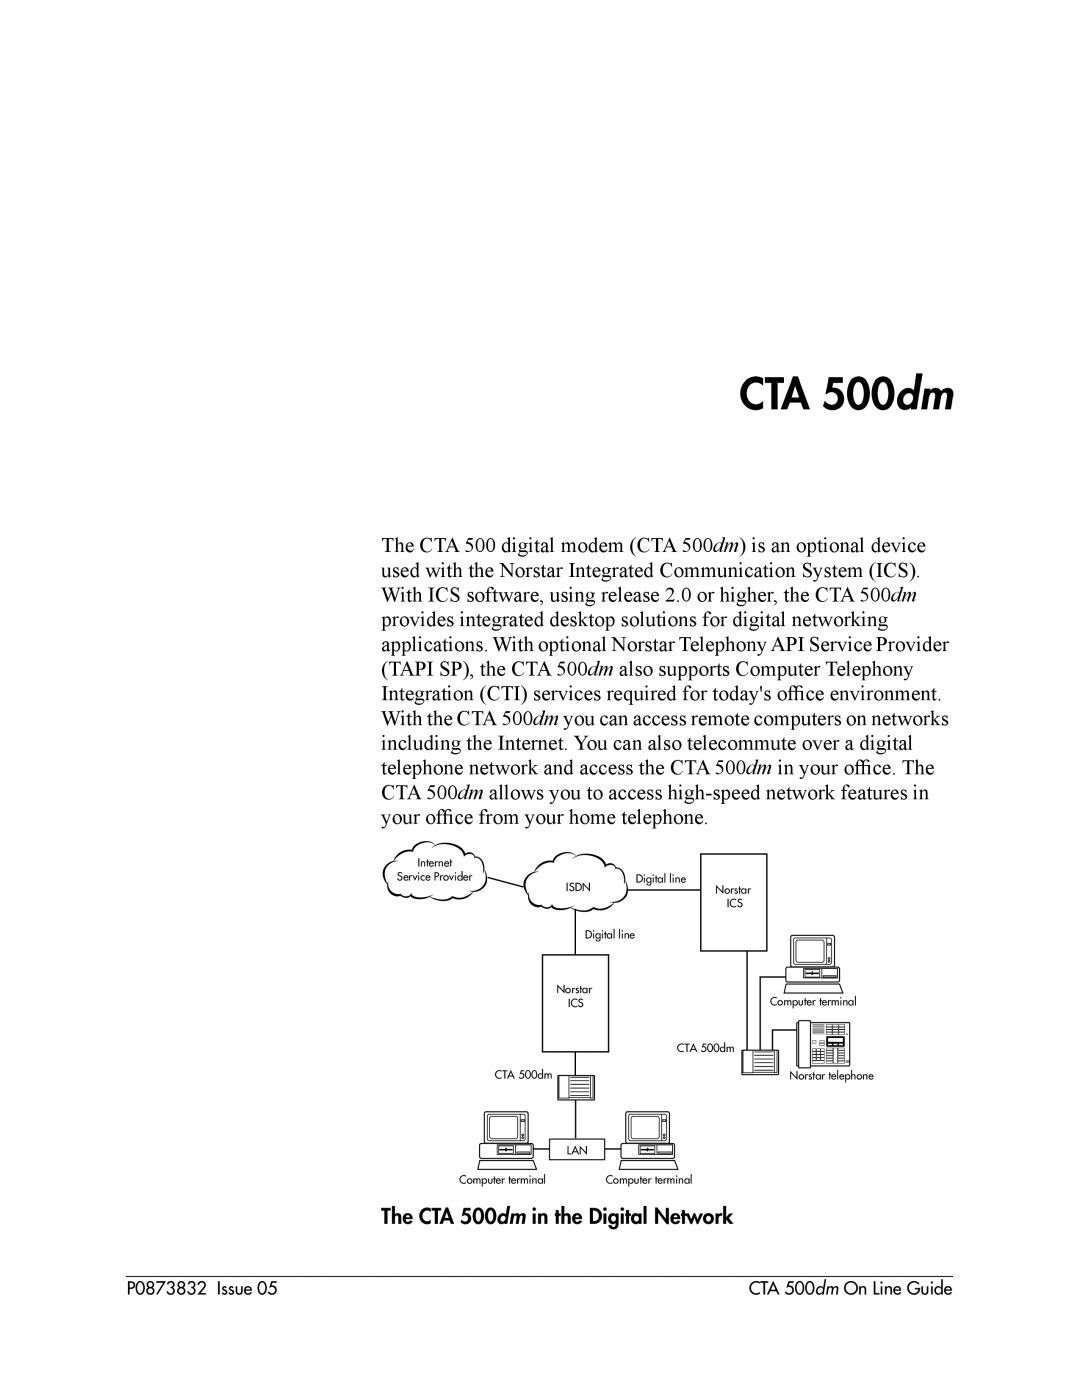 Nortel Networks manual The CTA 500dm in the Digital Network 